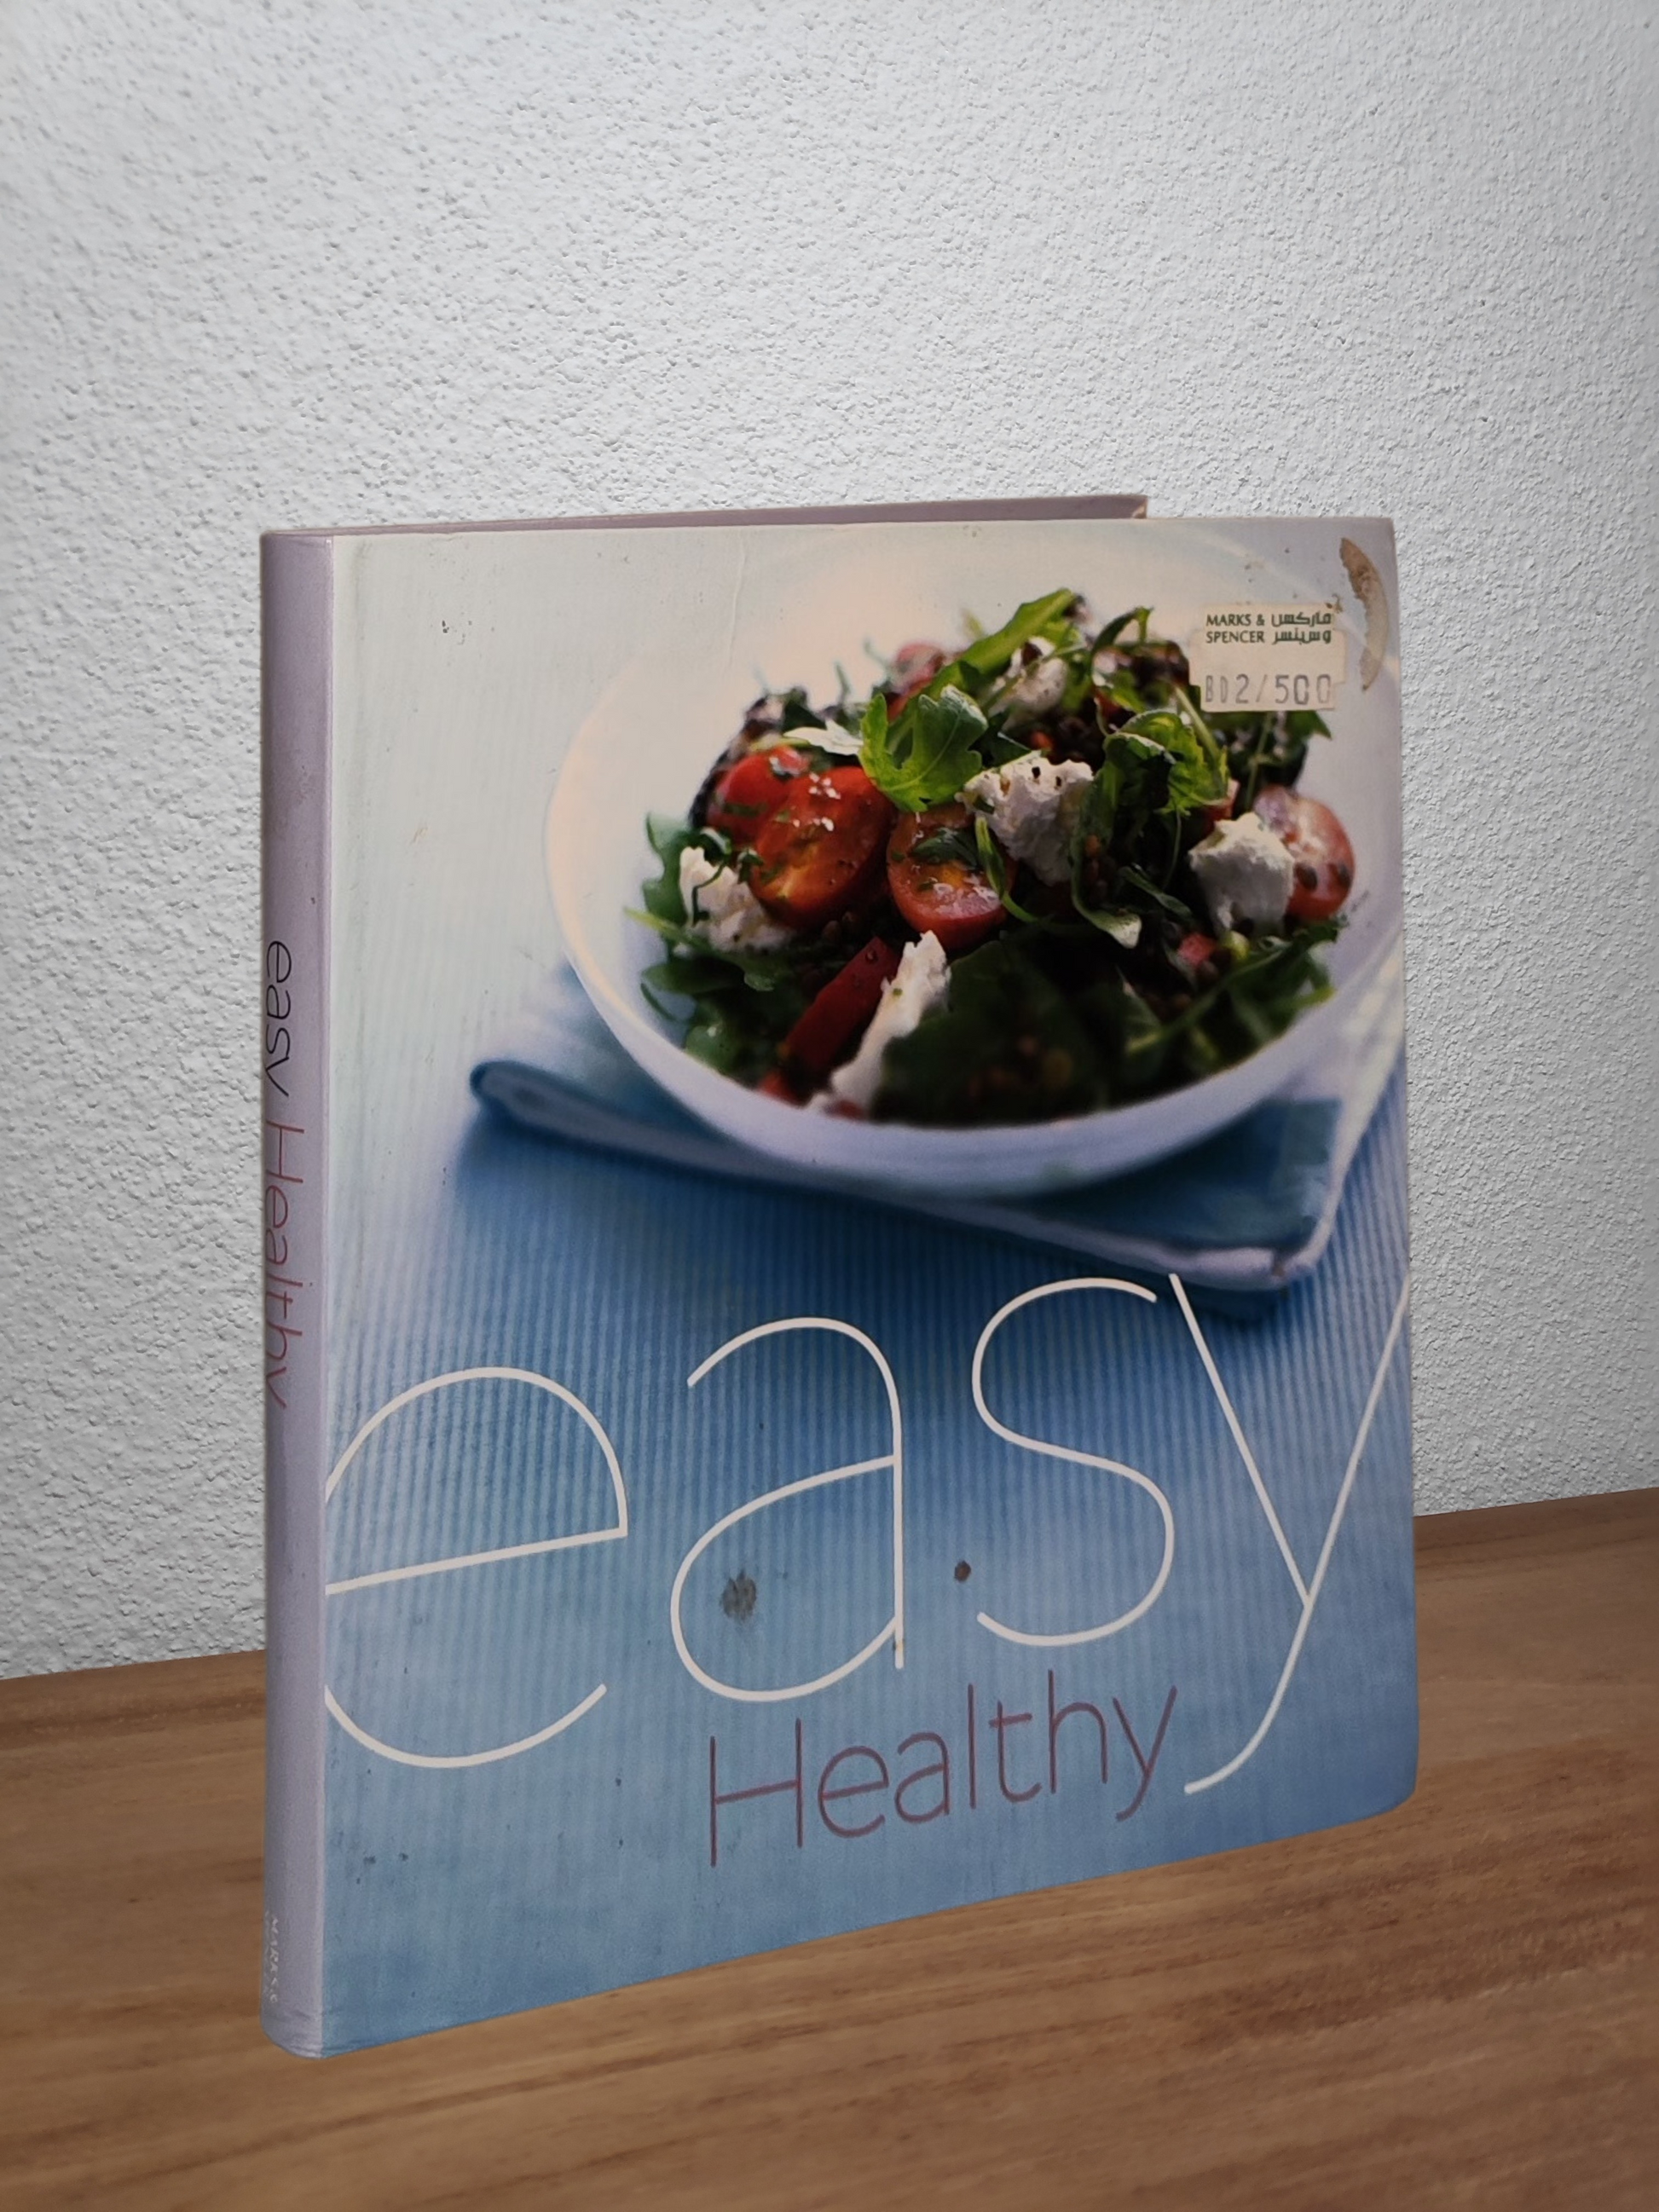 Marks & Spencer - Easy Healthy  - Second-hand english book to deliver in Zurich & Switzerland